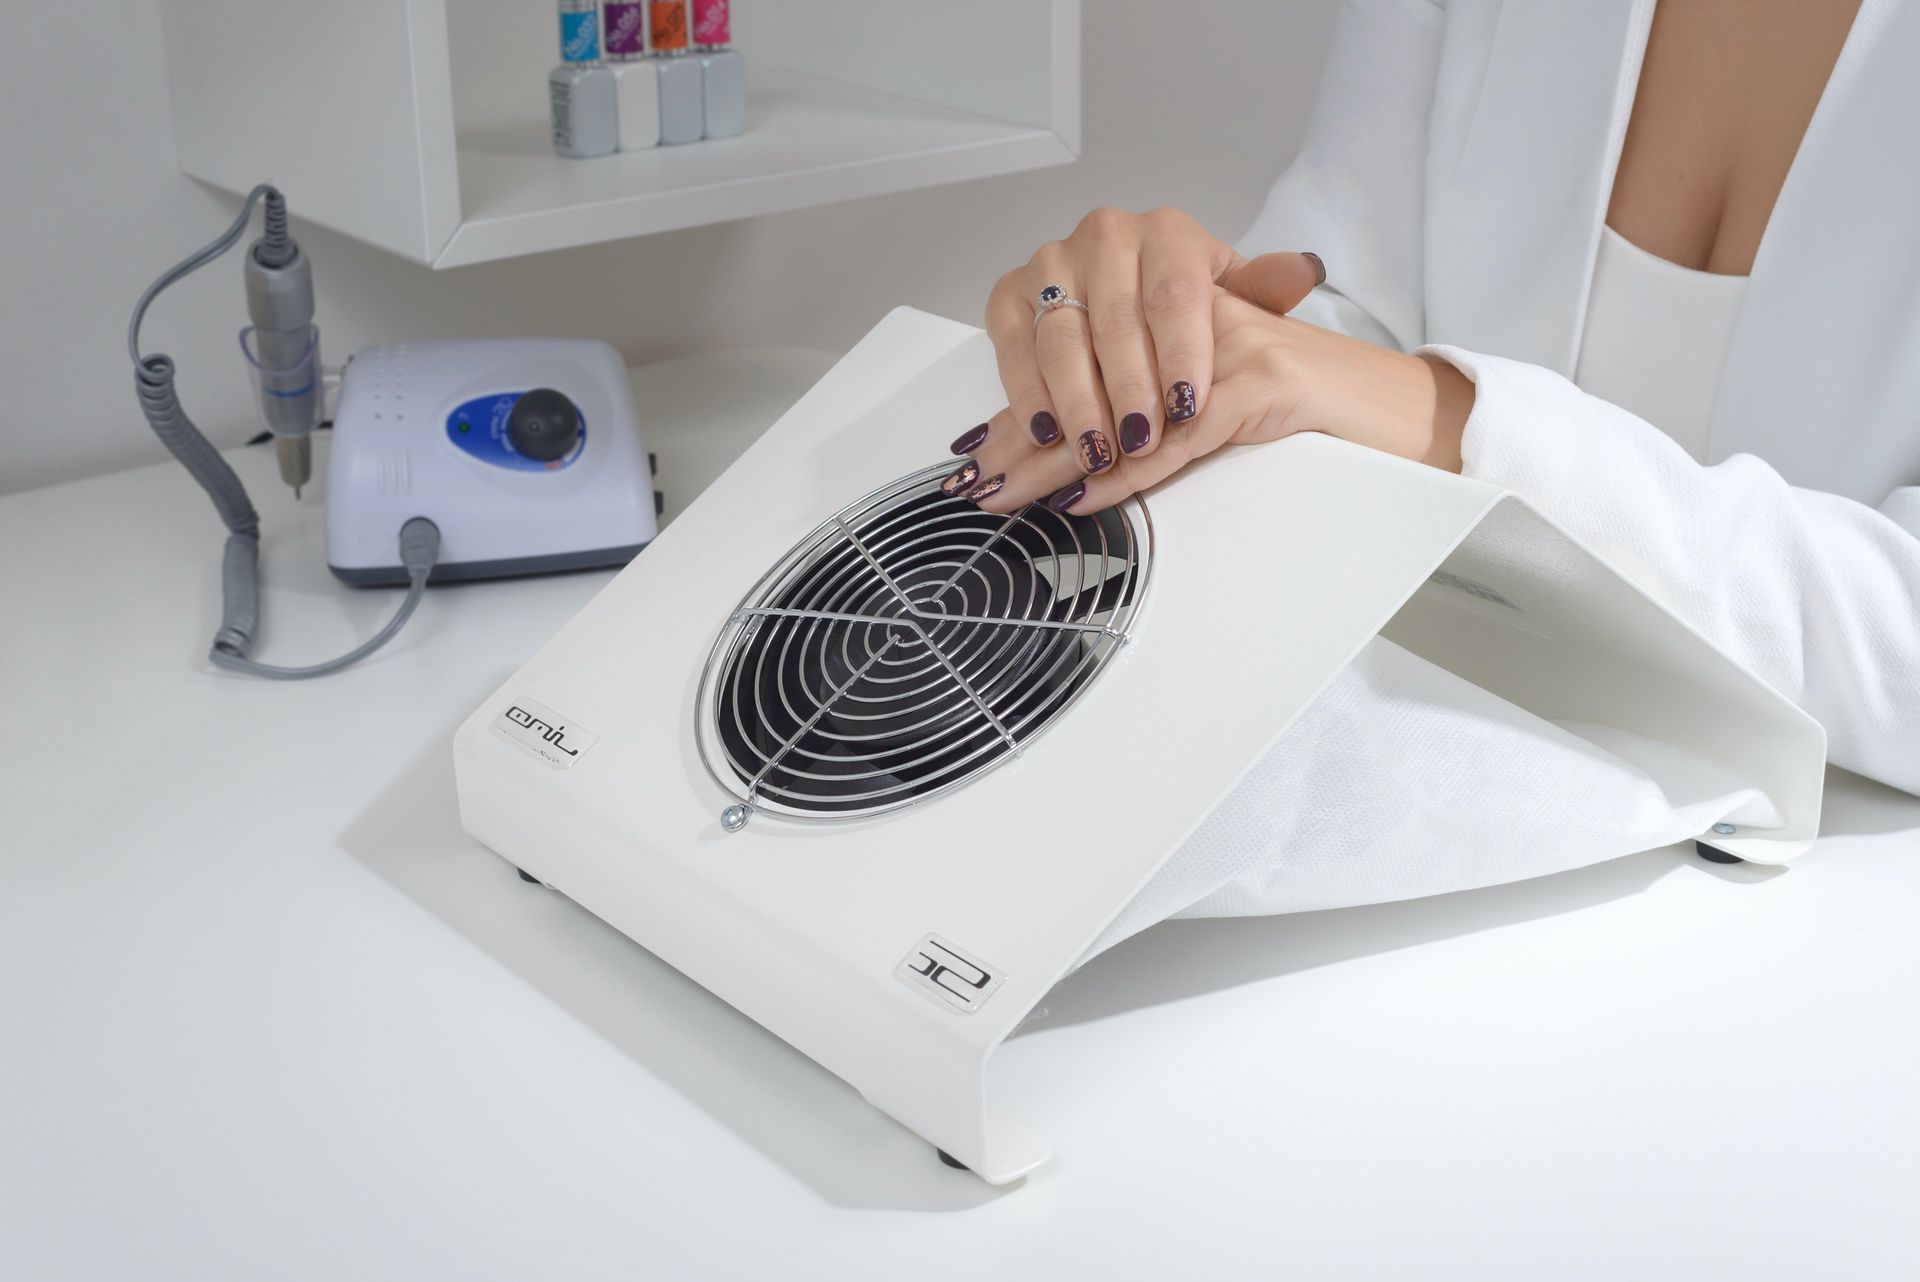 1. "Portable Nail Art Table with Dust Collector" - wide 4